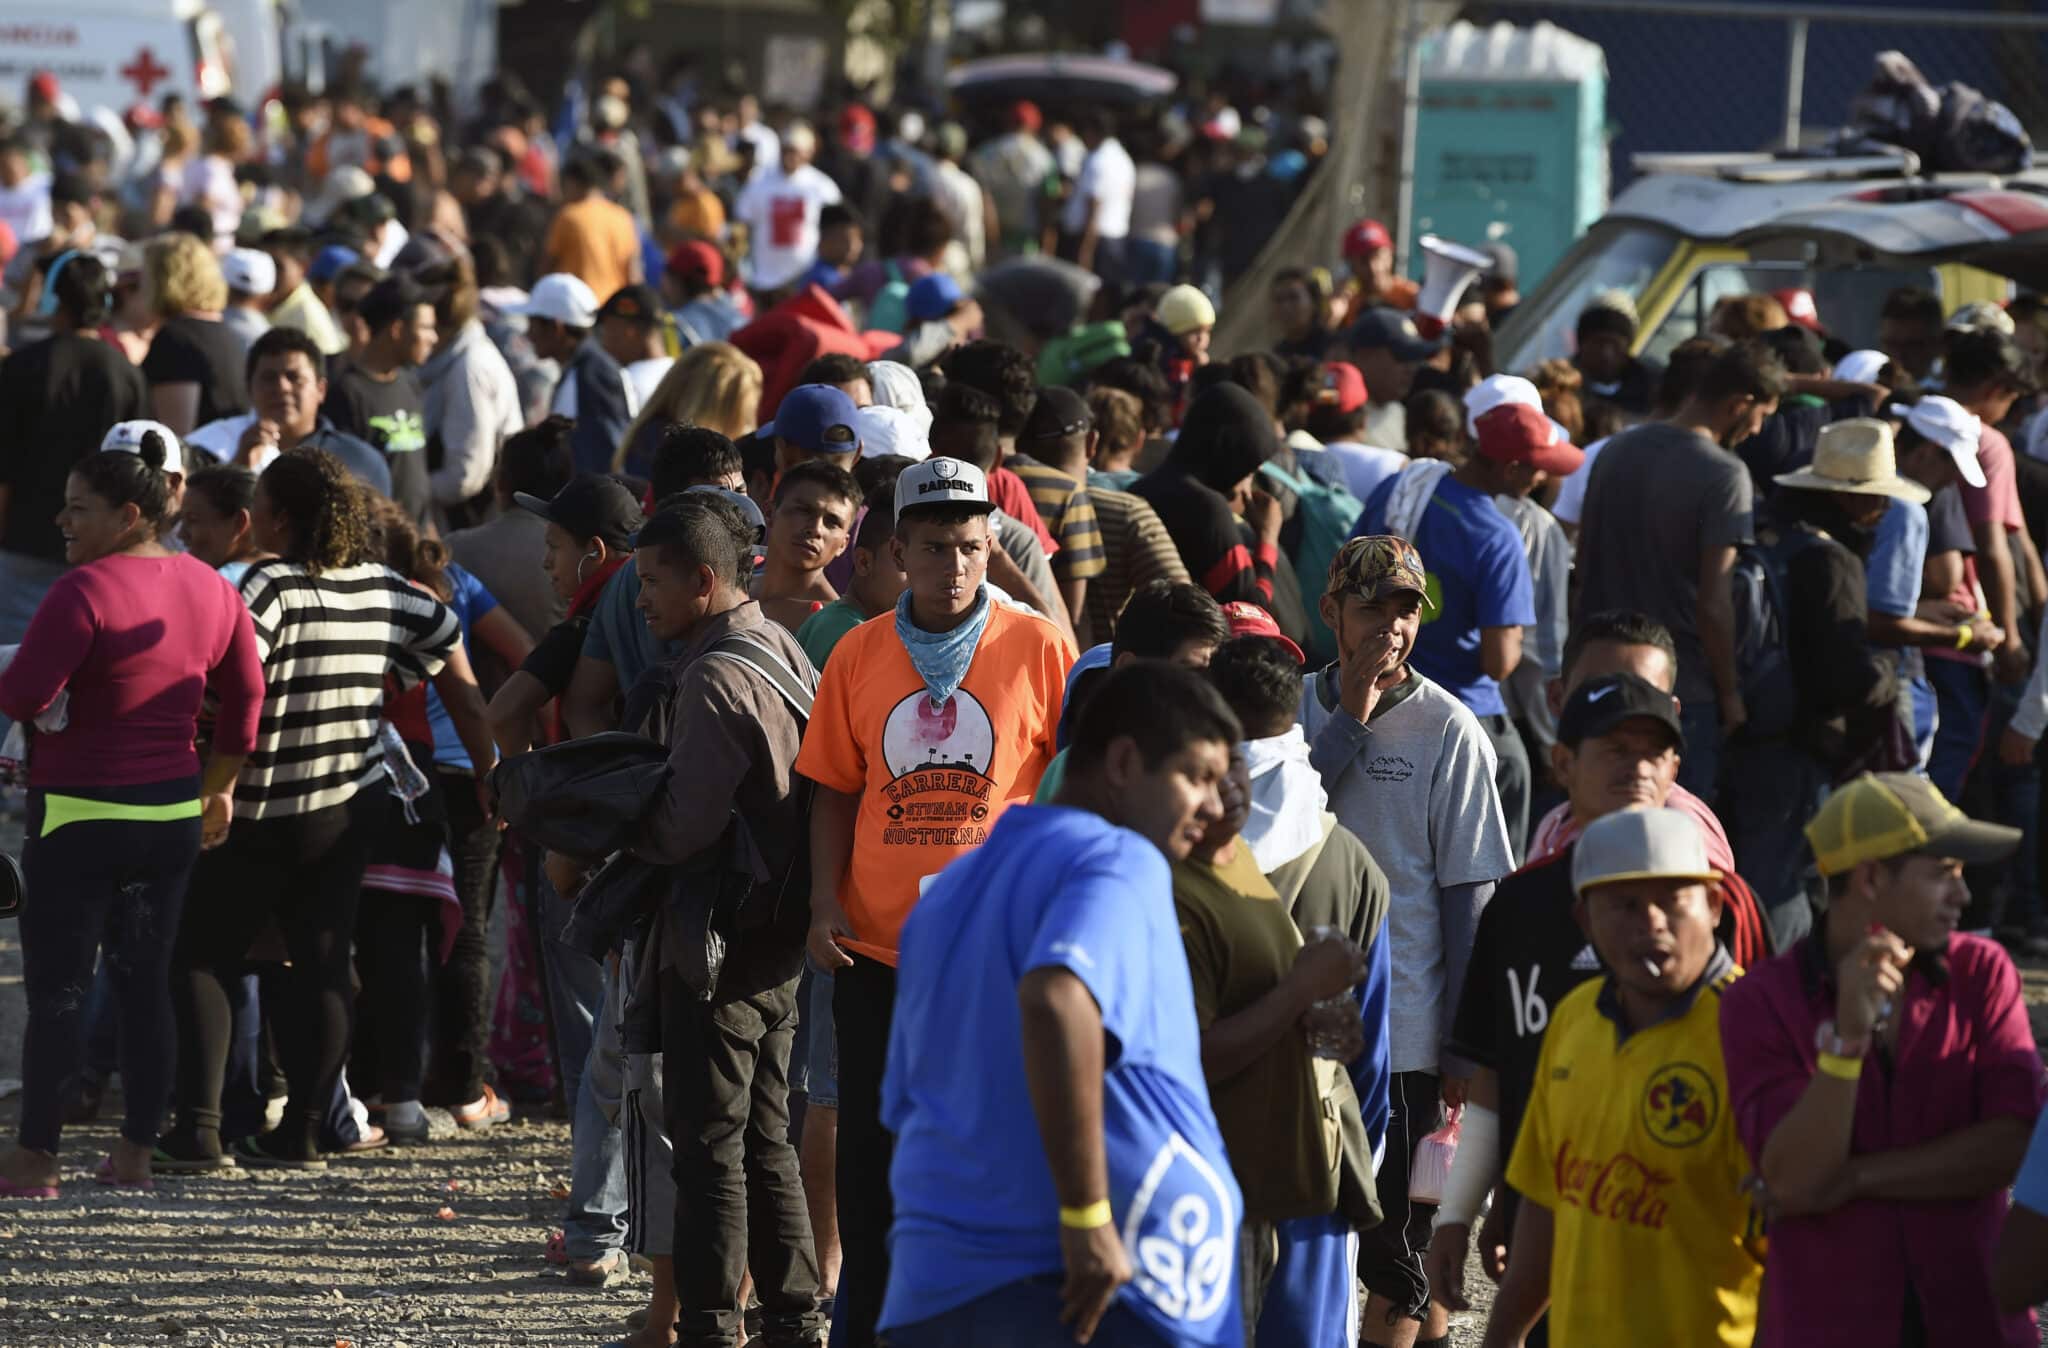 Central American migrants, taking part in a caravan heading to the US, queue to receive a meal at a temporary shelter in Irapuato, Guanajuato state, Mexico on November 11, 2018. - The trek from tropical Central America to the huge capital of Mexico is declining the health of the migrant caravan that endures extreme climate changes, as well as overcrowding and physical exhaustion, and still has to face the desert that leads to the United States. (Photo by ALFREDO ESTRELLA / AFP)        (Photo credit should read ALFREDO ESTRELLA/AFP via Getty Images)